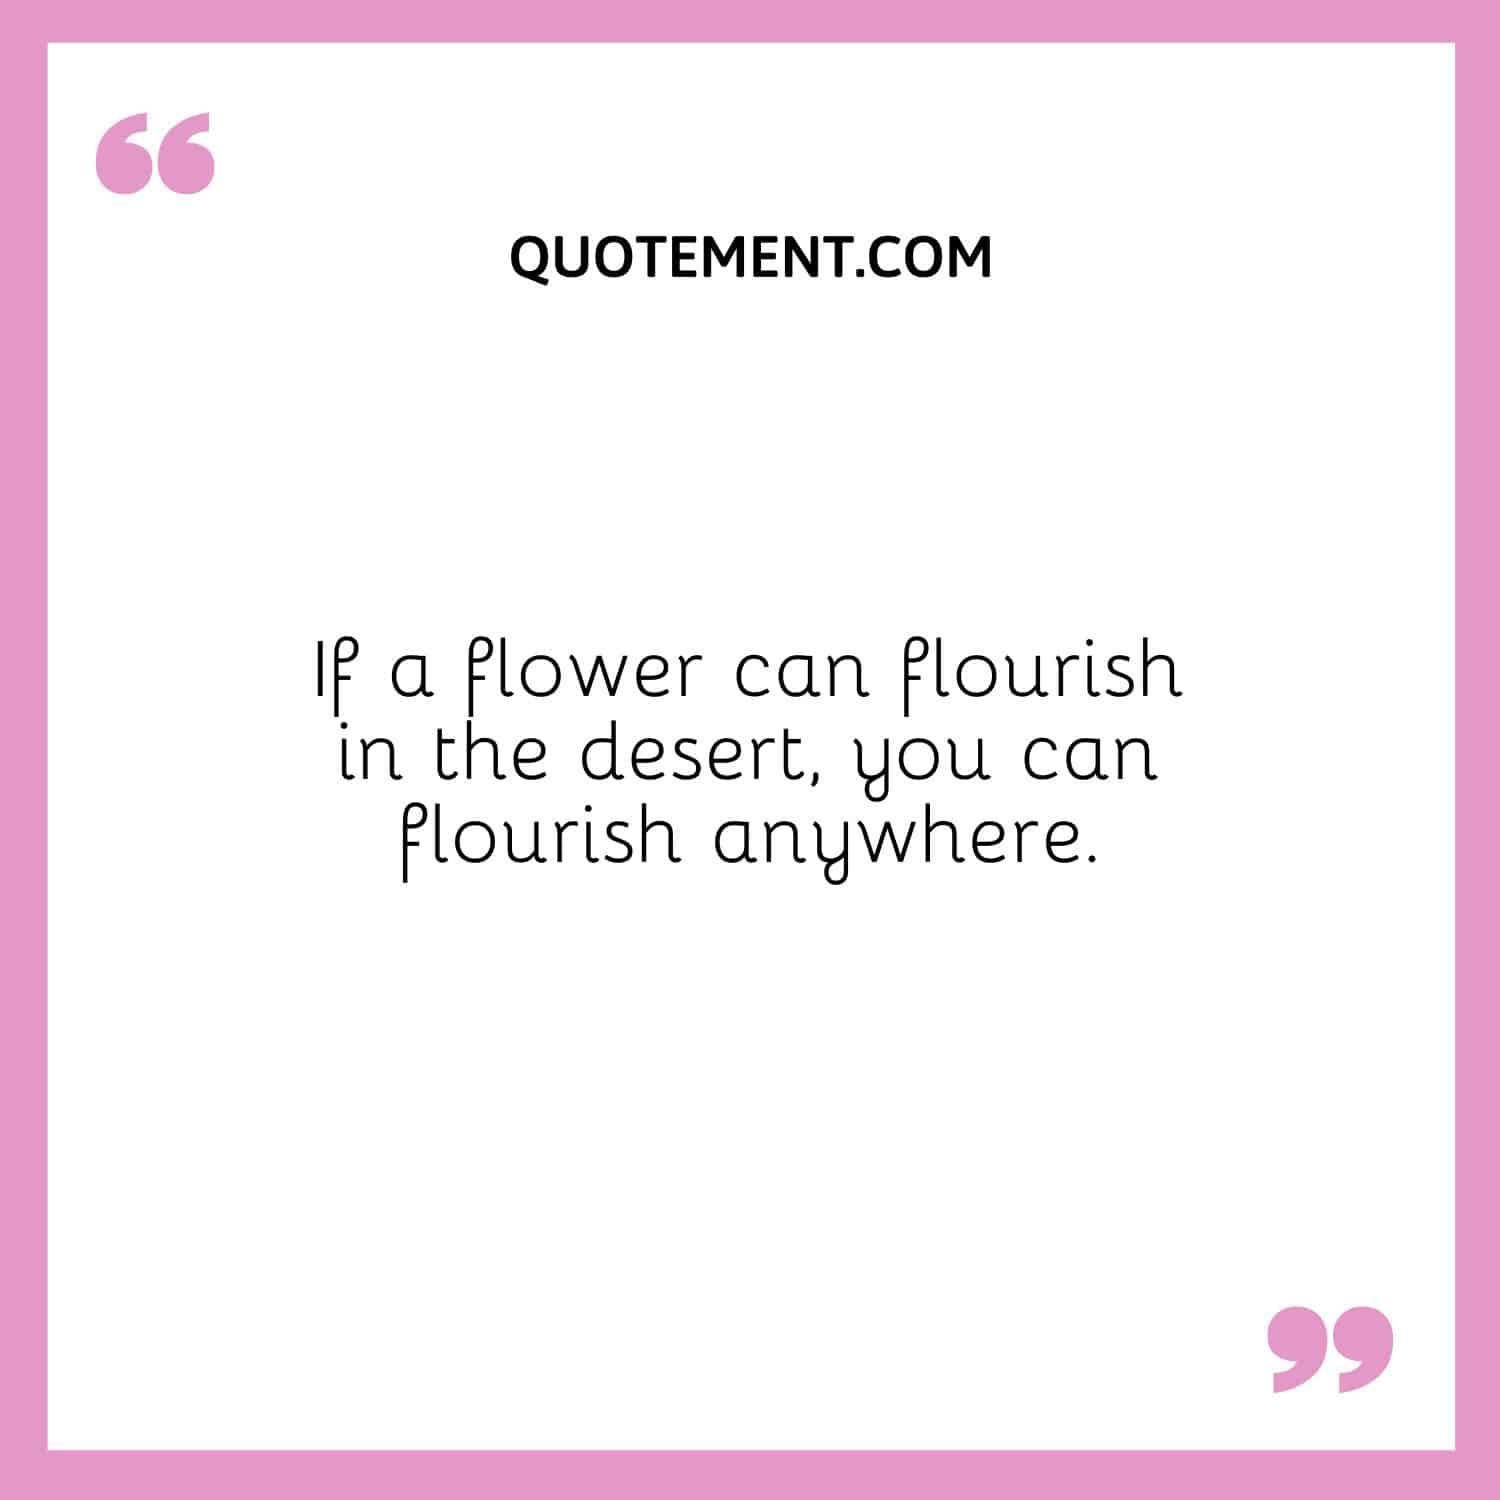 If a flower can flourish in the desert, you can flourish anywhere.